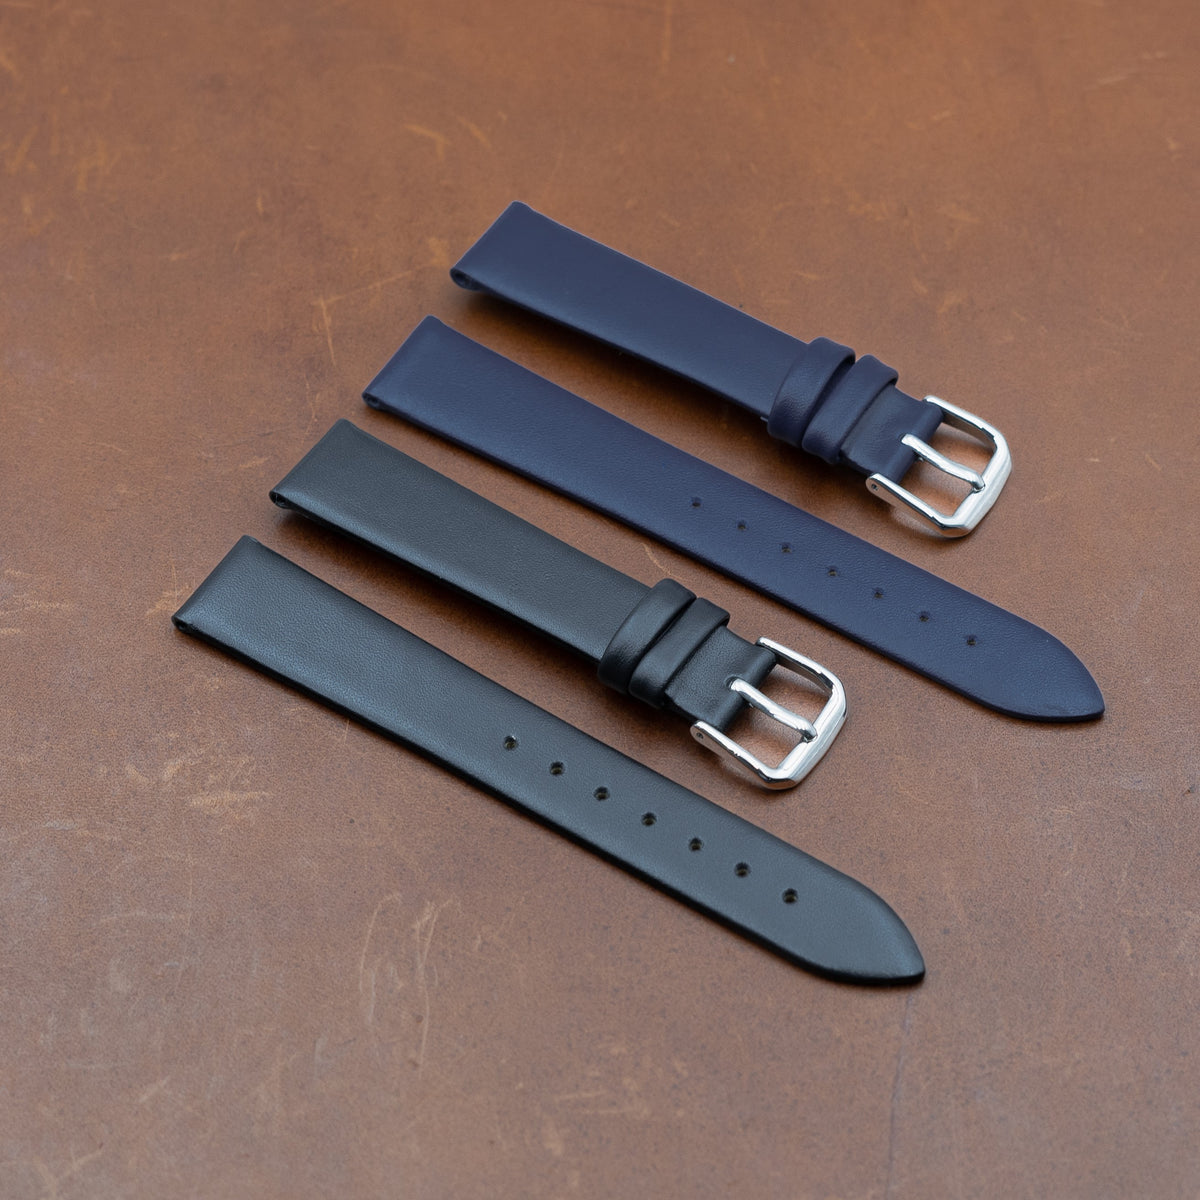 Unstitched Smooth Leather Watch Strap in Black (12mm) - Nomad Watch Works MY